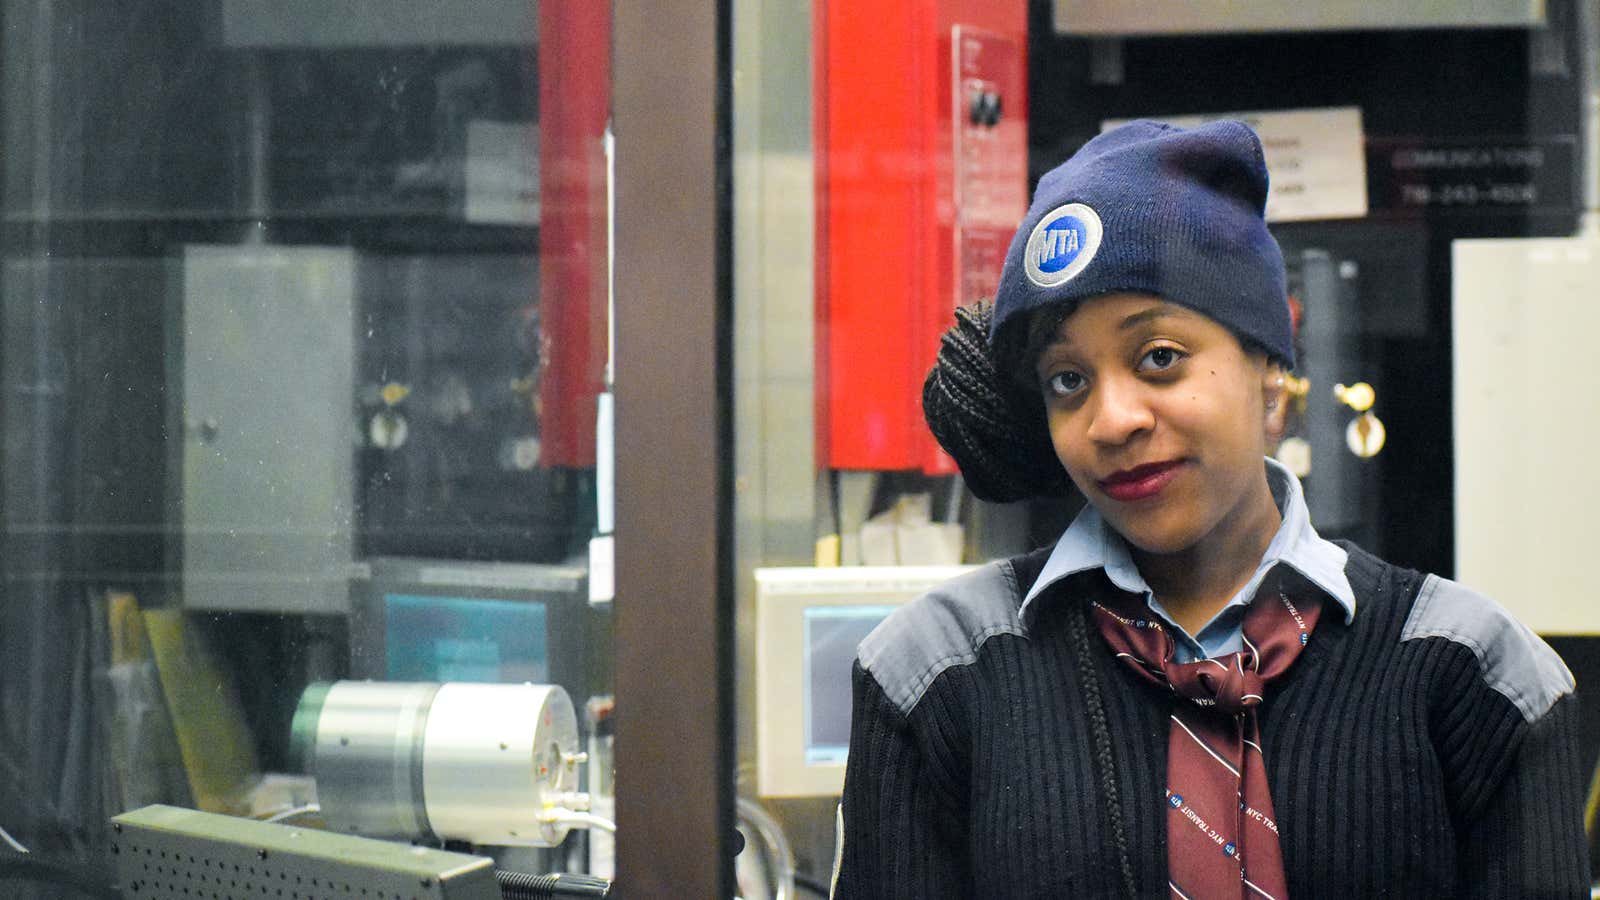 Alexis Simone Webster works in booths in different subway stations. She calls the glass her “only protection.”